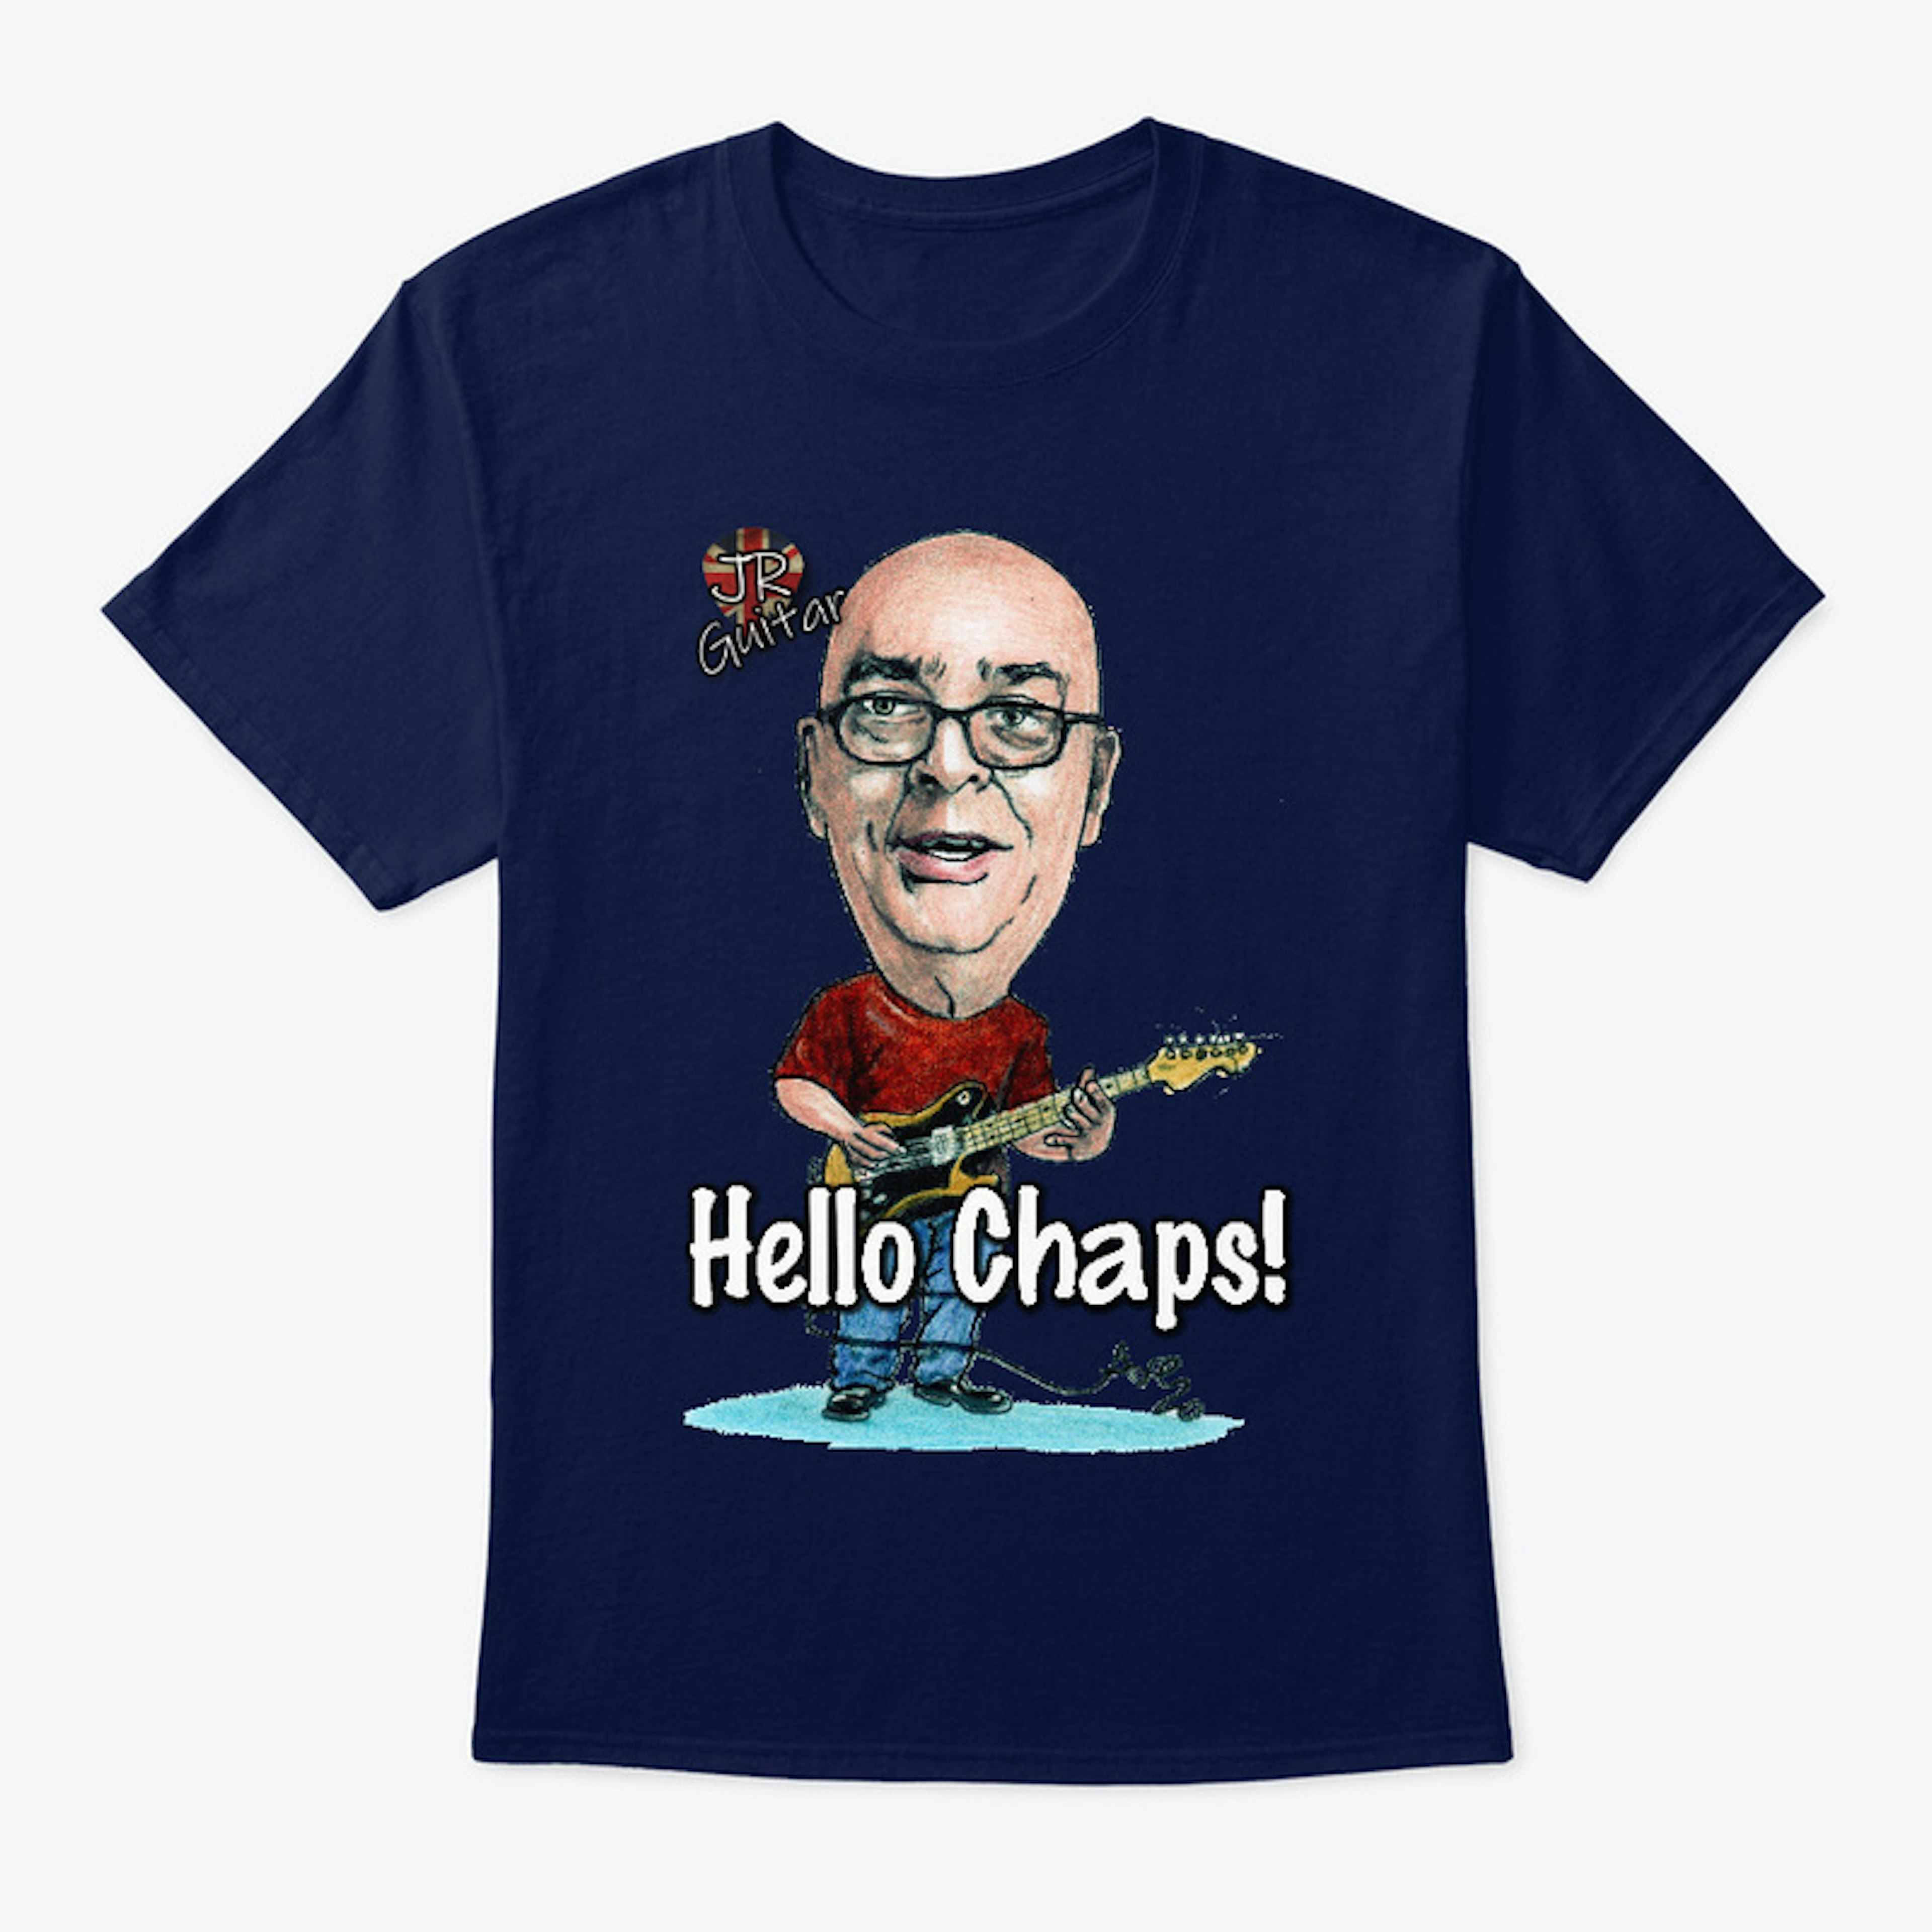 Hello Chaps - Proceeds To Zoe's Place